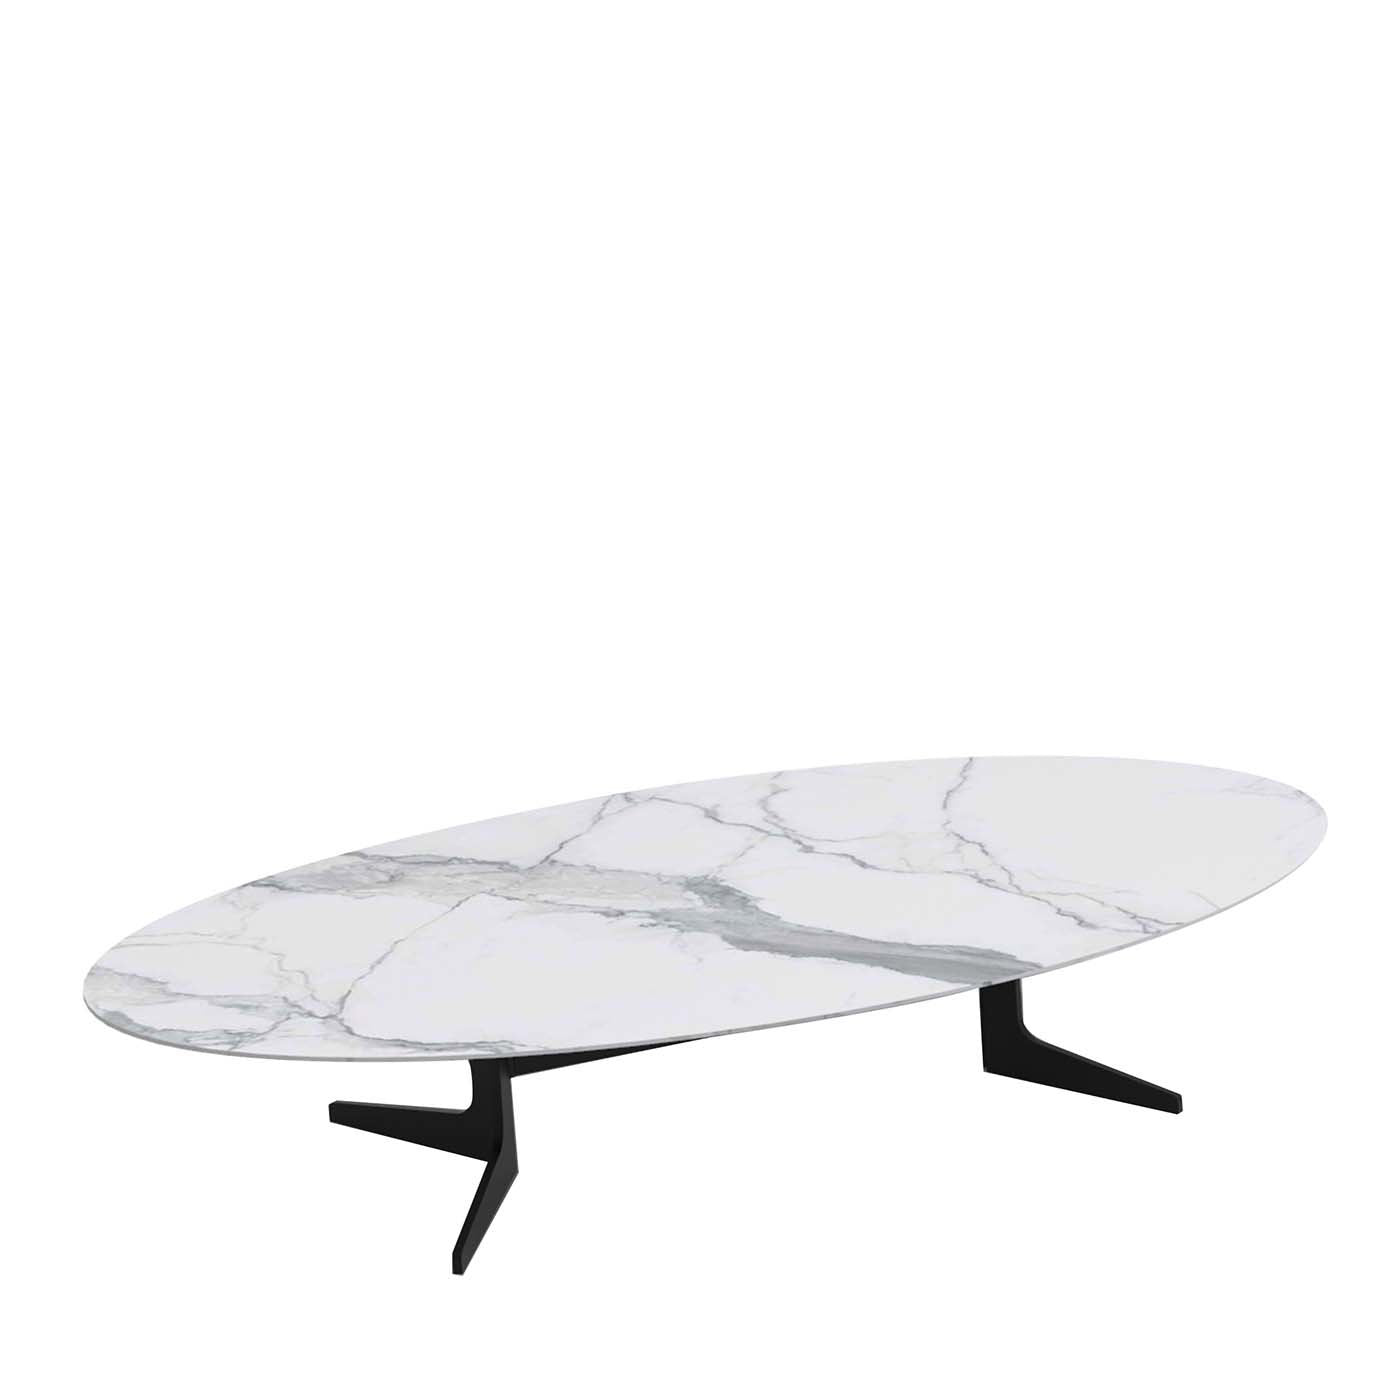 Blake Oval Coffee Table with Calacatta Marble Top - Main view